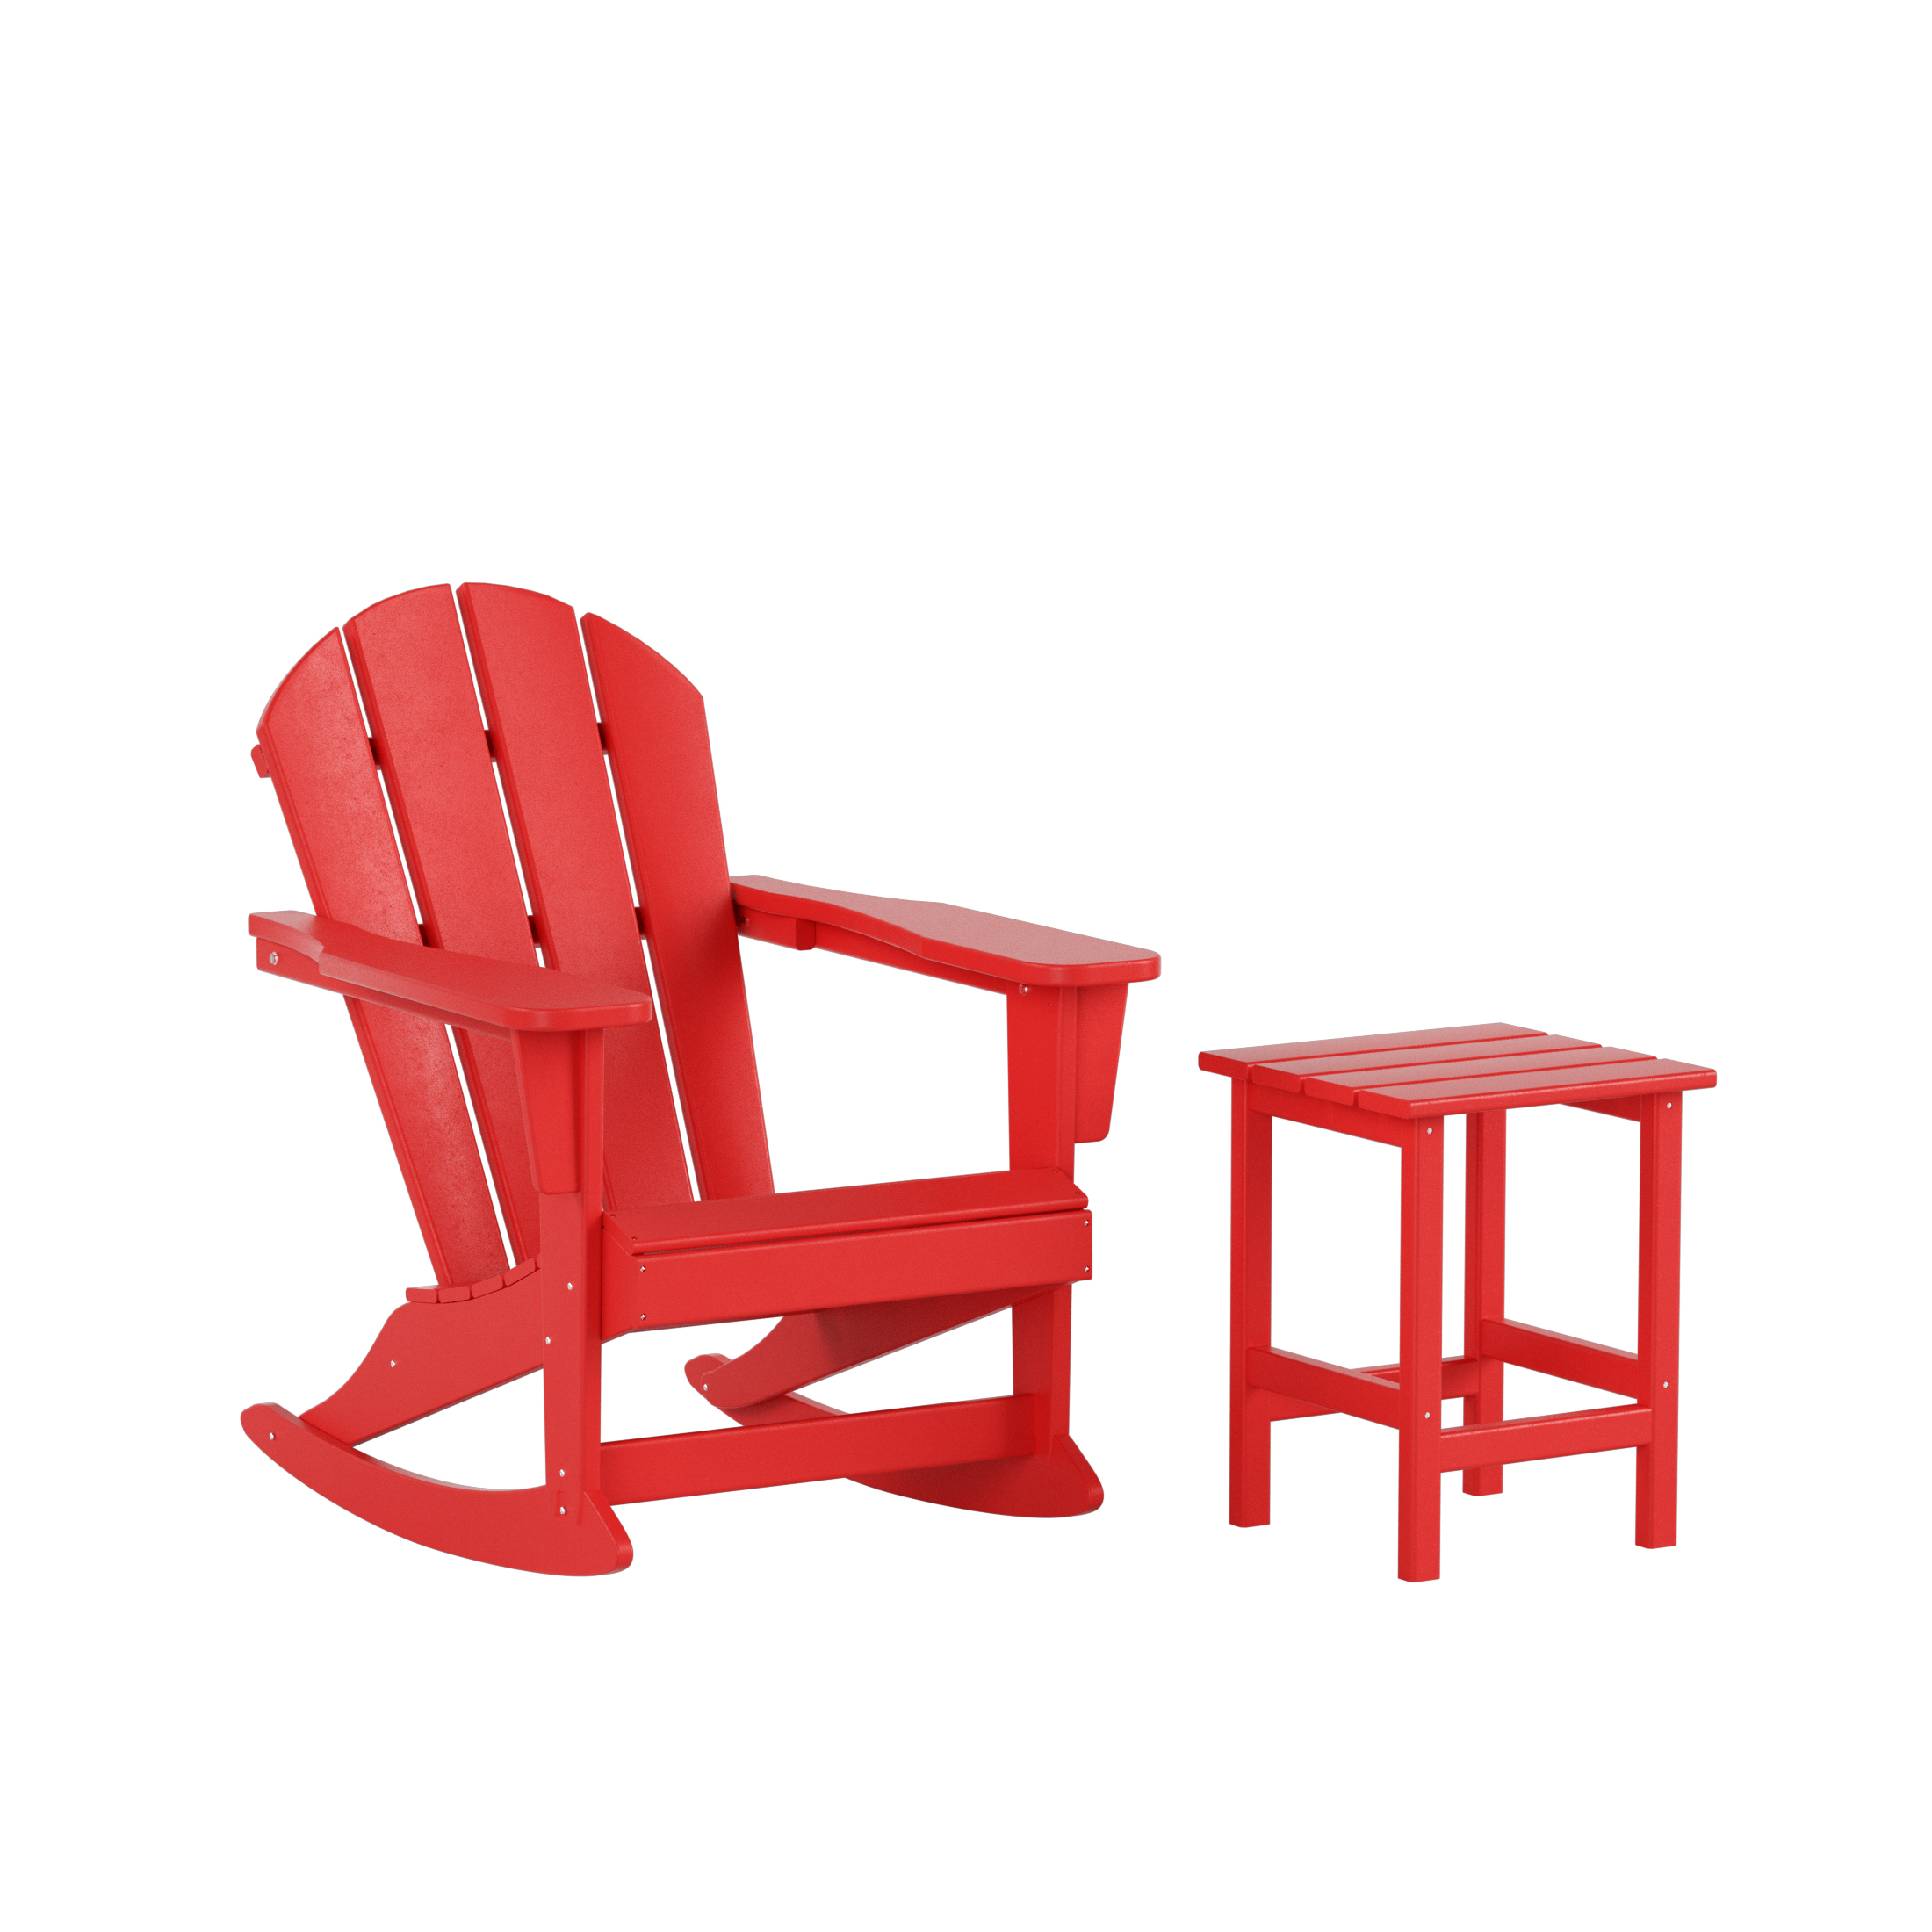 GARDEN 2-Piece Set Plastic Outdoor Rocking Chair with Square Side Table Included, Red - image 2 of 11